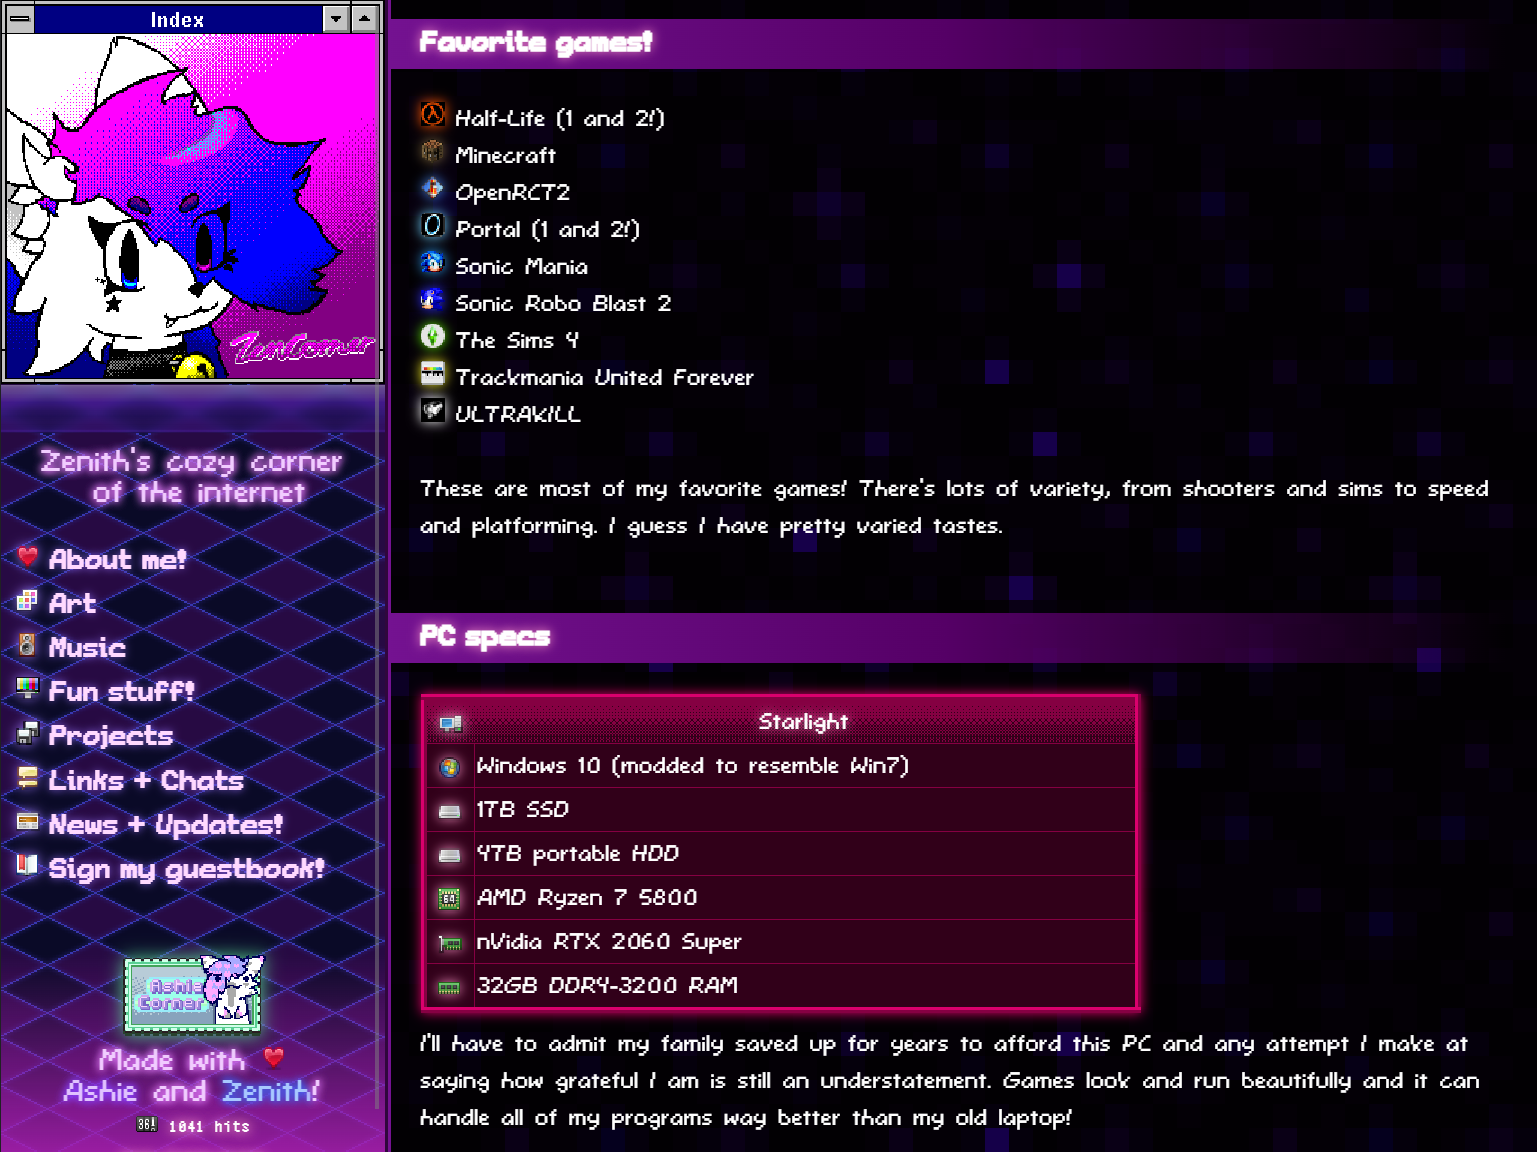 A section of the About Me page of zencorner.xyz